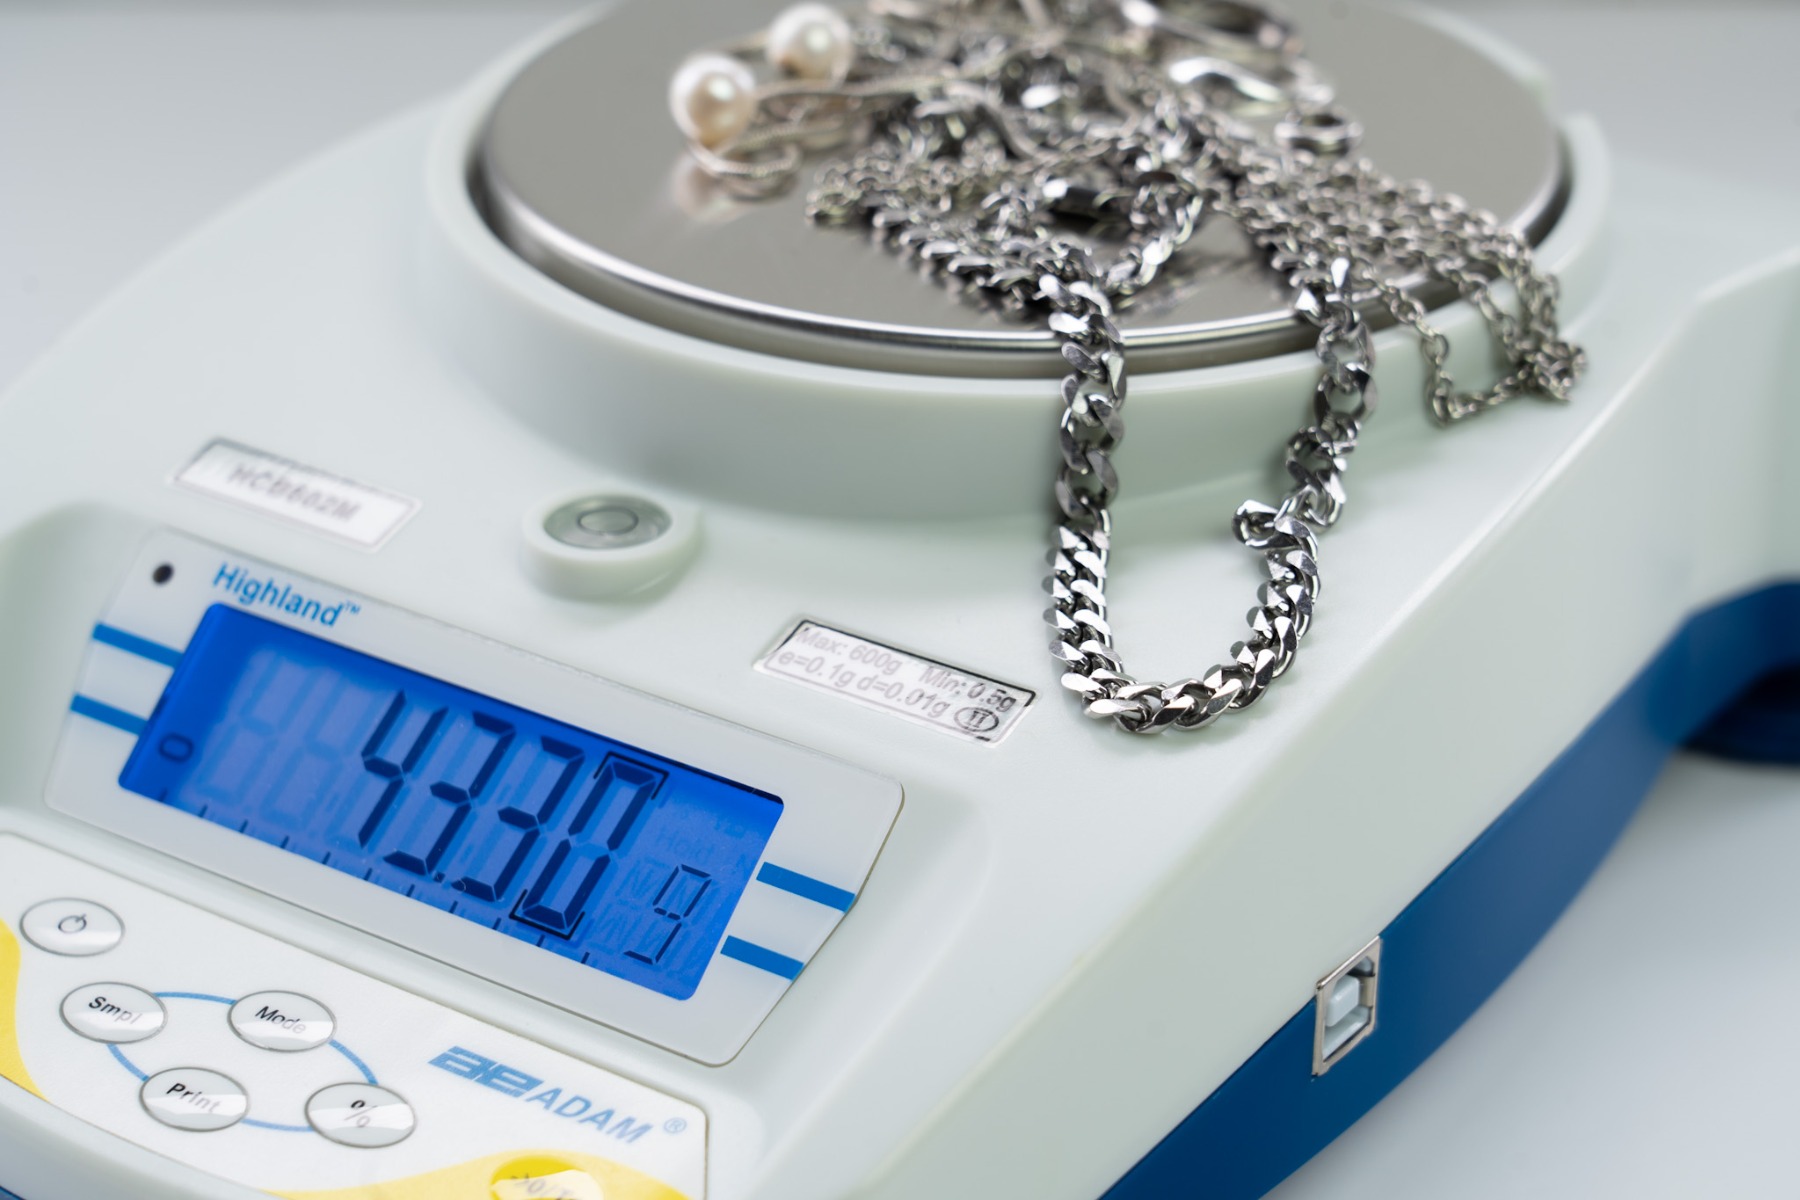 Highland Portable Precision balance weighing jewellery